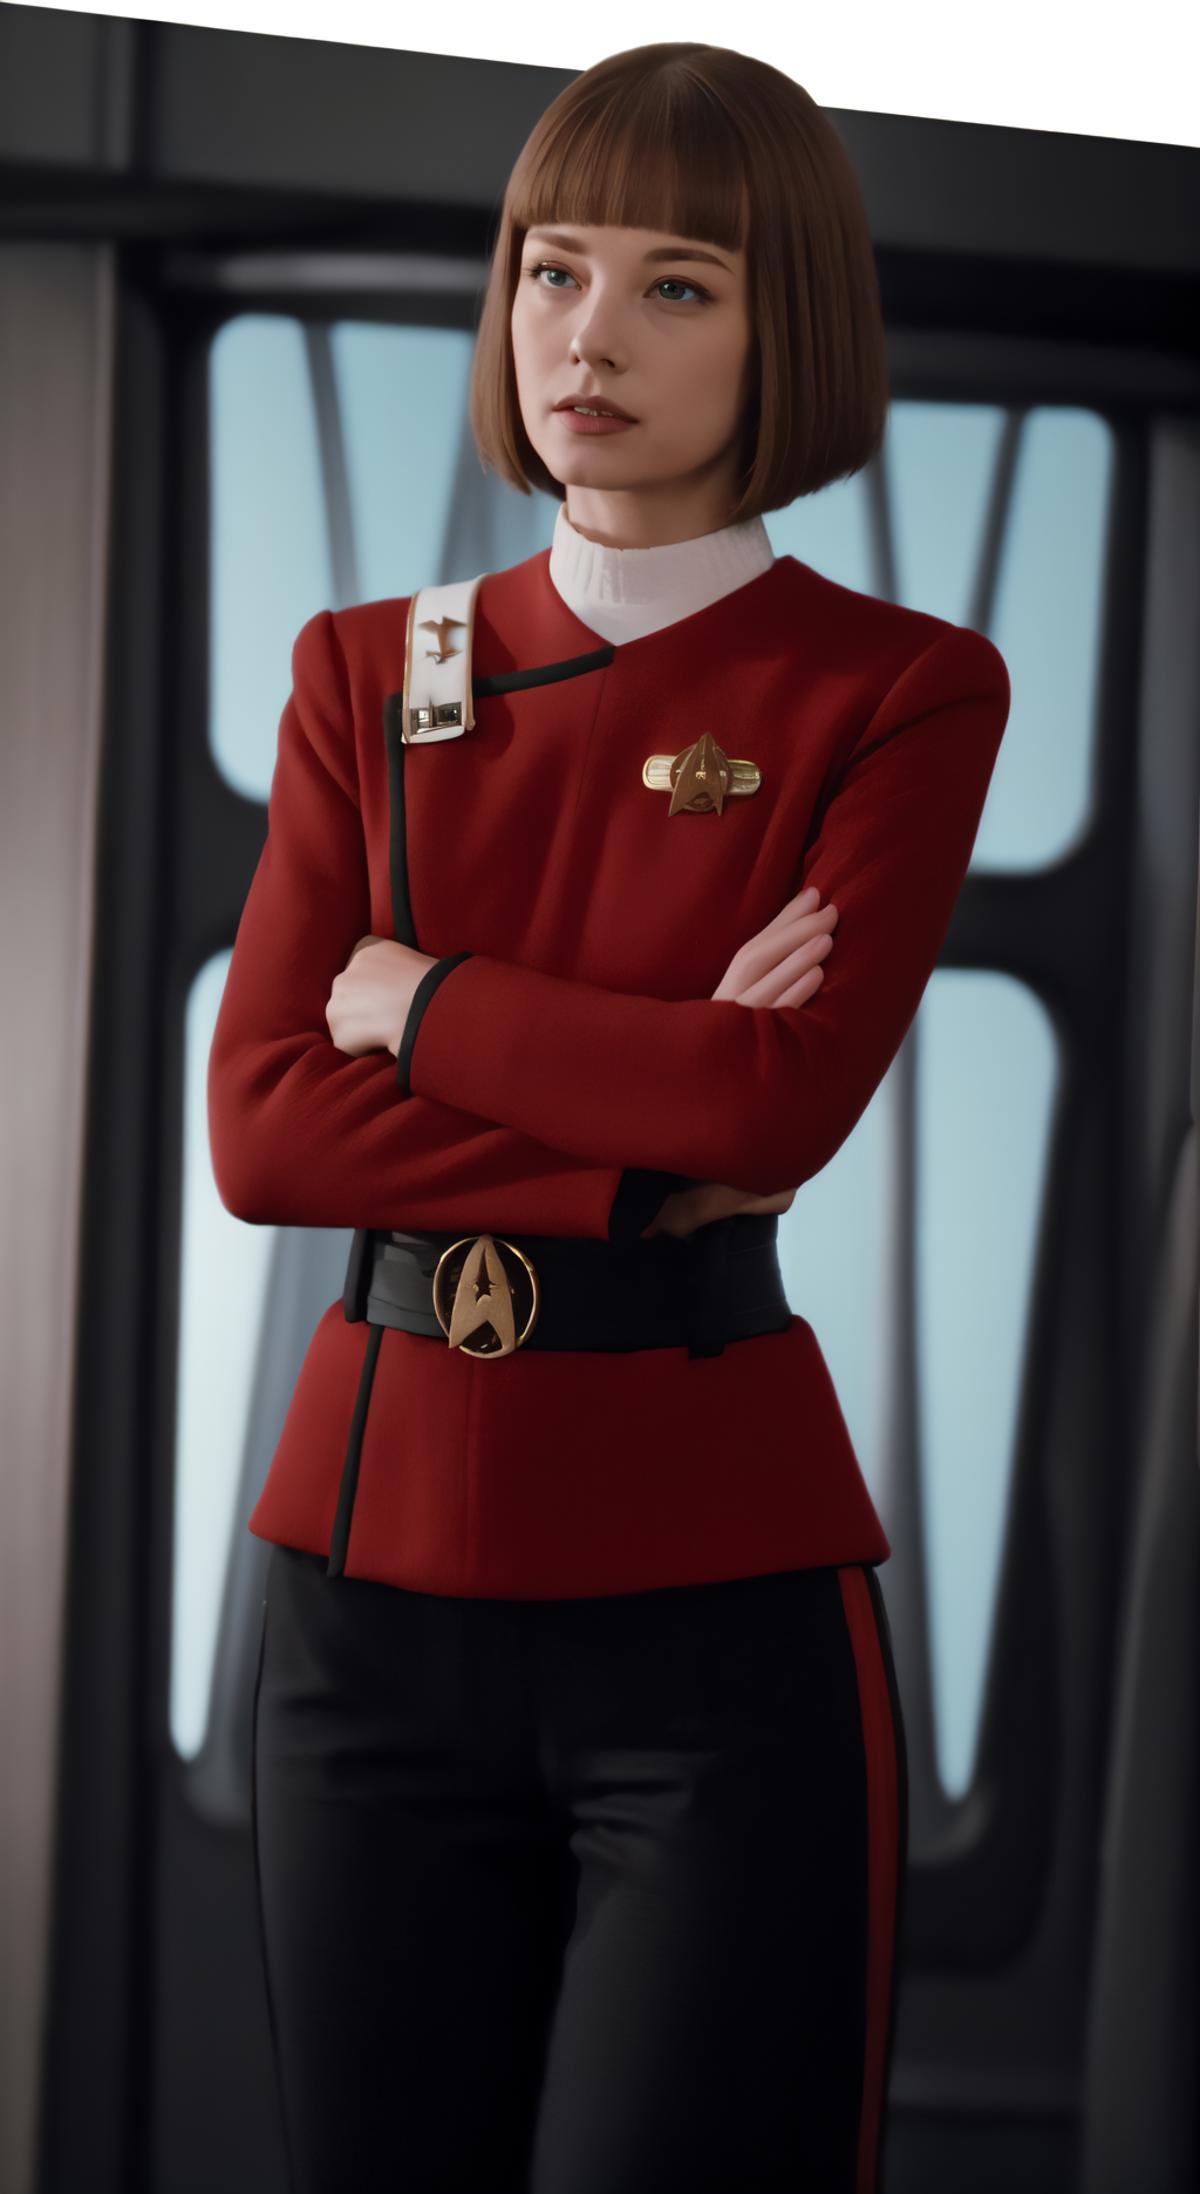 Star Trek TWoK uniforms image by impossiblebearcl4060